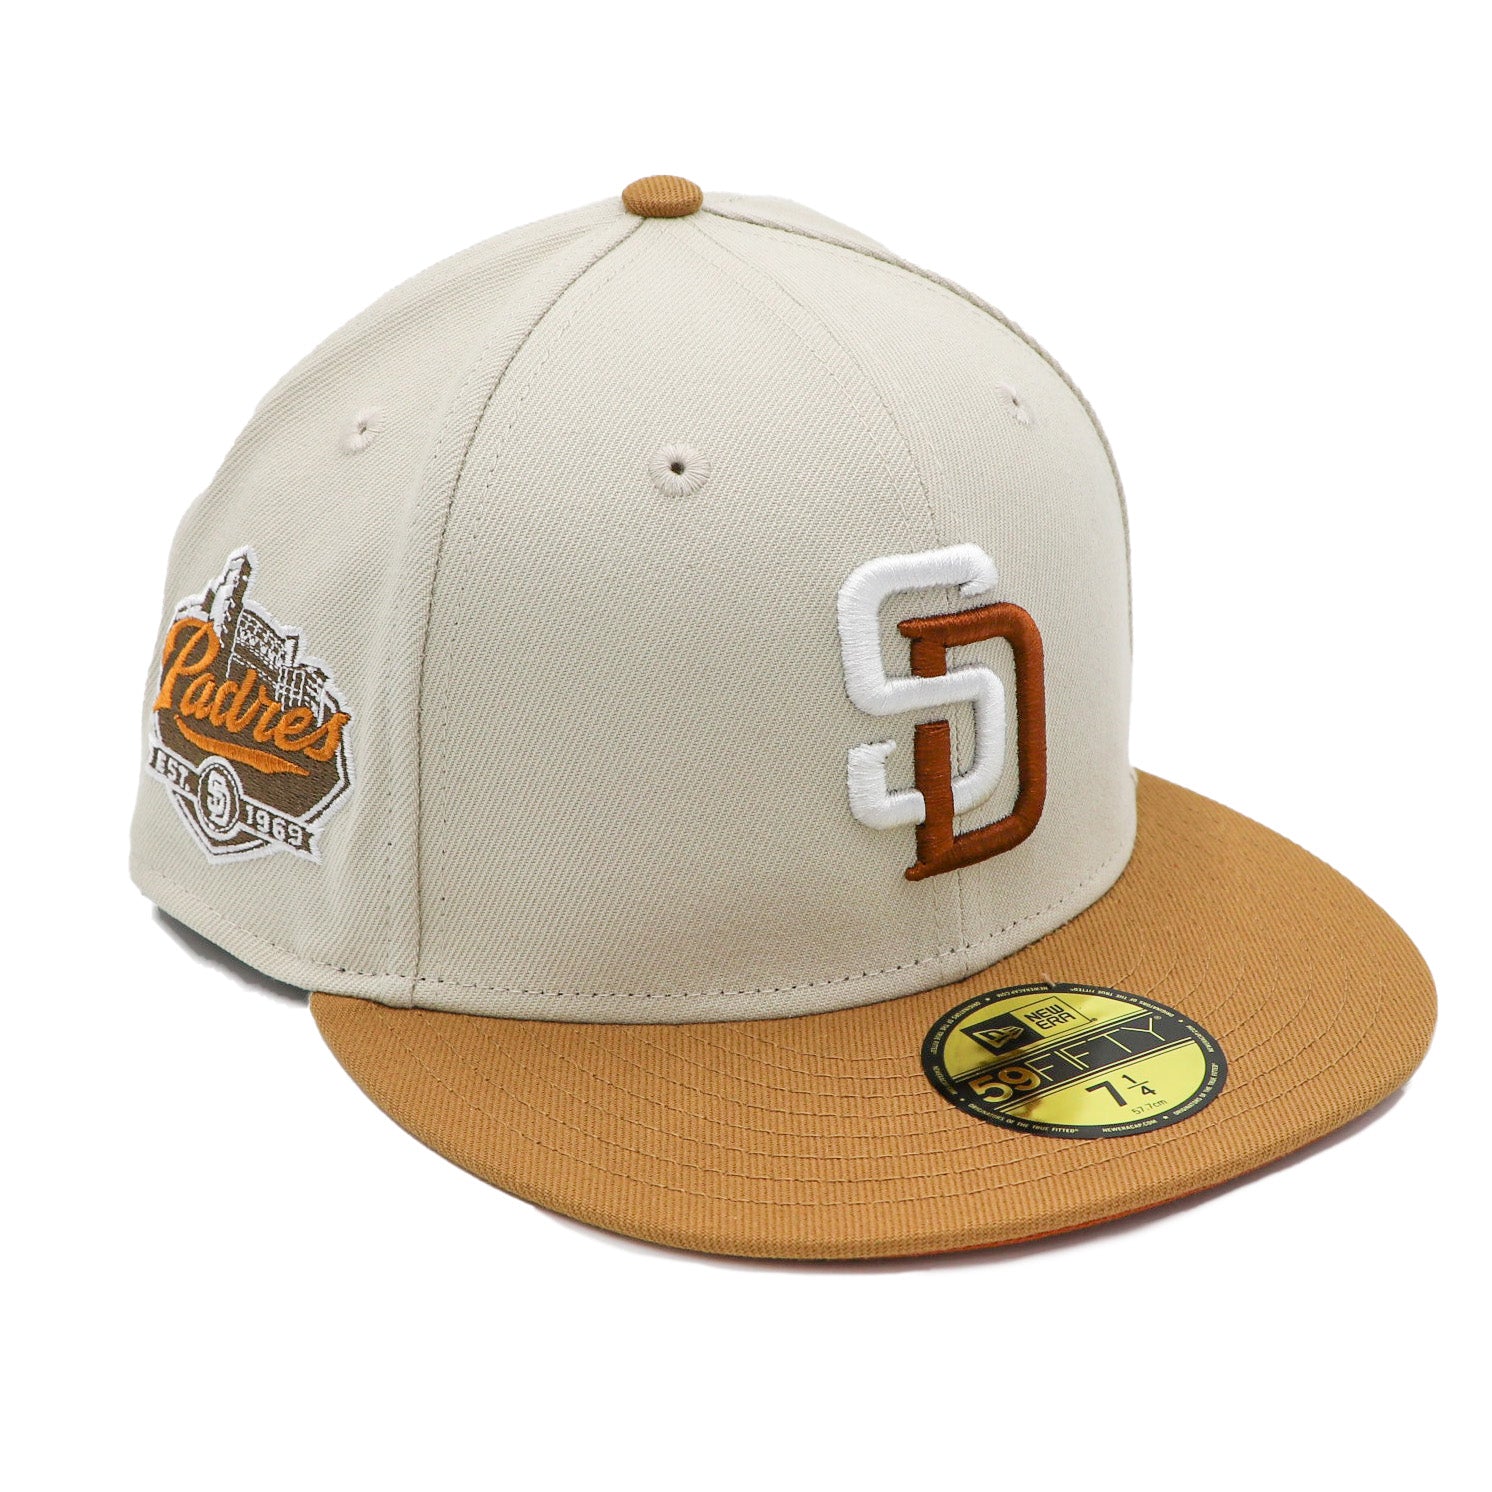 New Era 59 Fifty San Diego Padres Fitted Hat Tan/Beige Petco Park 7